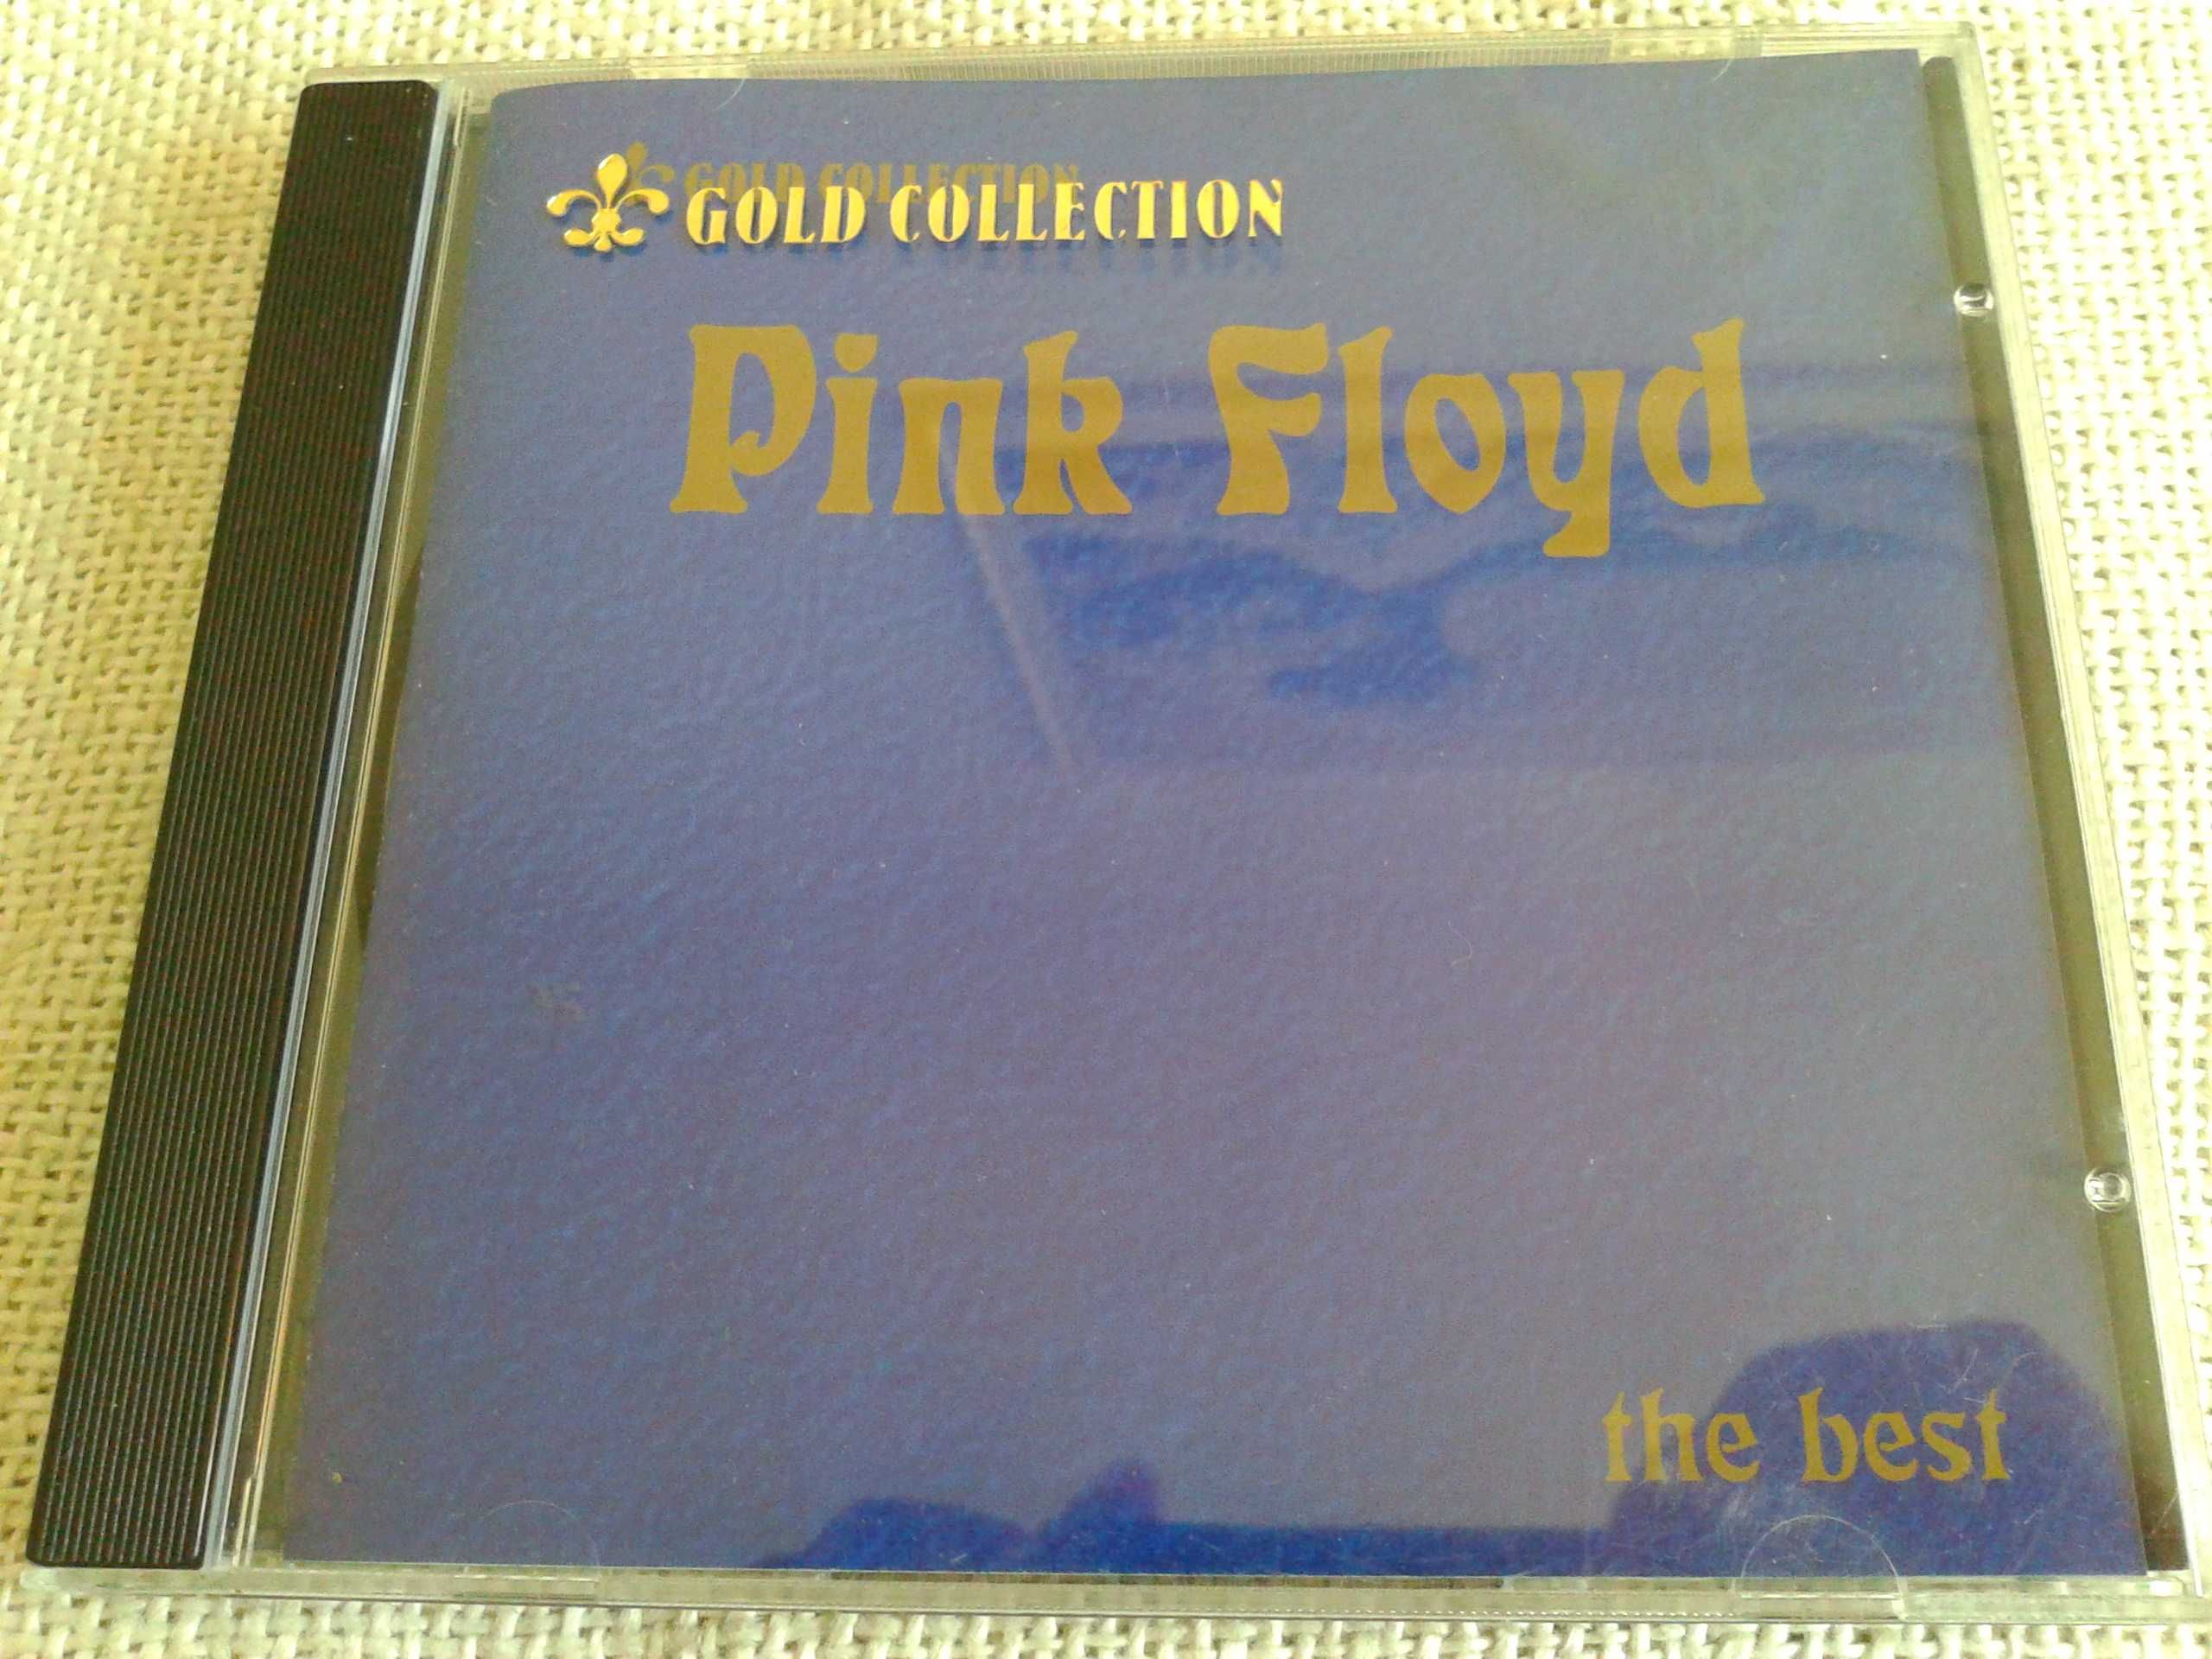 Pink Floyd - The Best, Gold Collection  CD